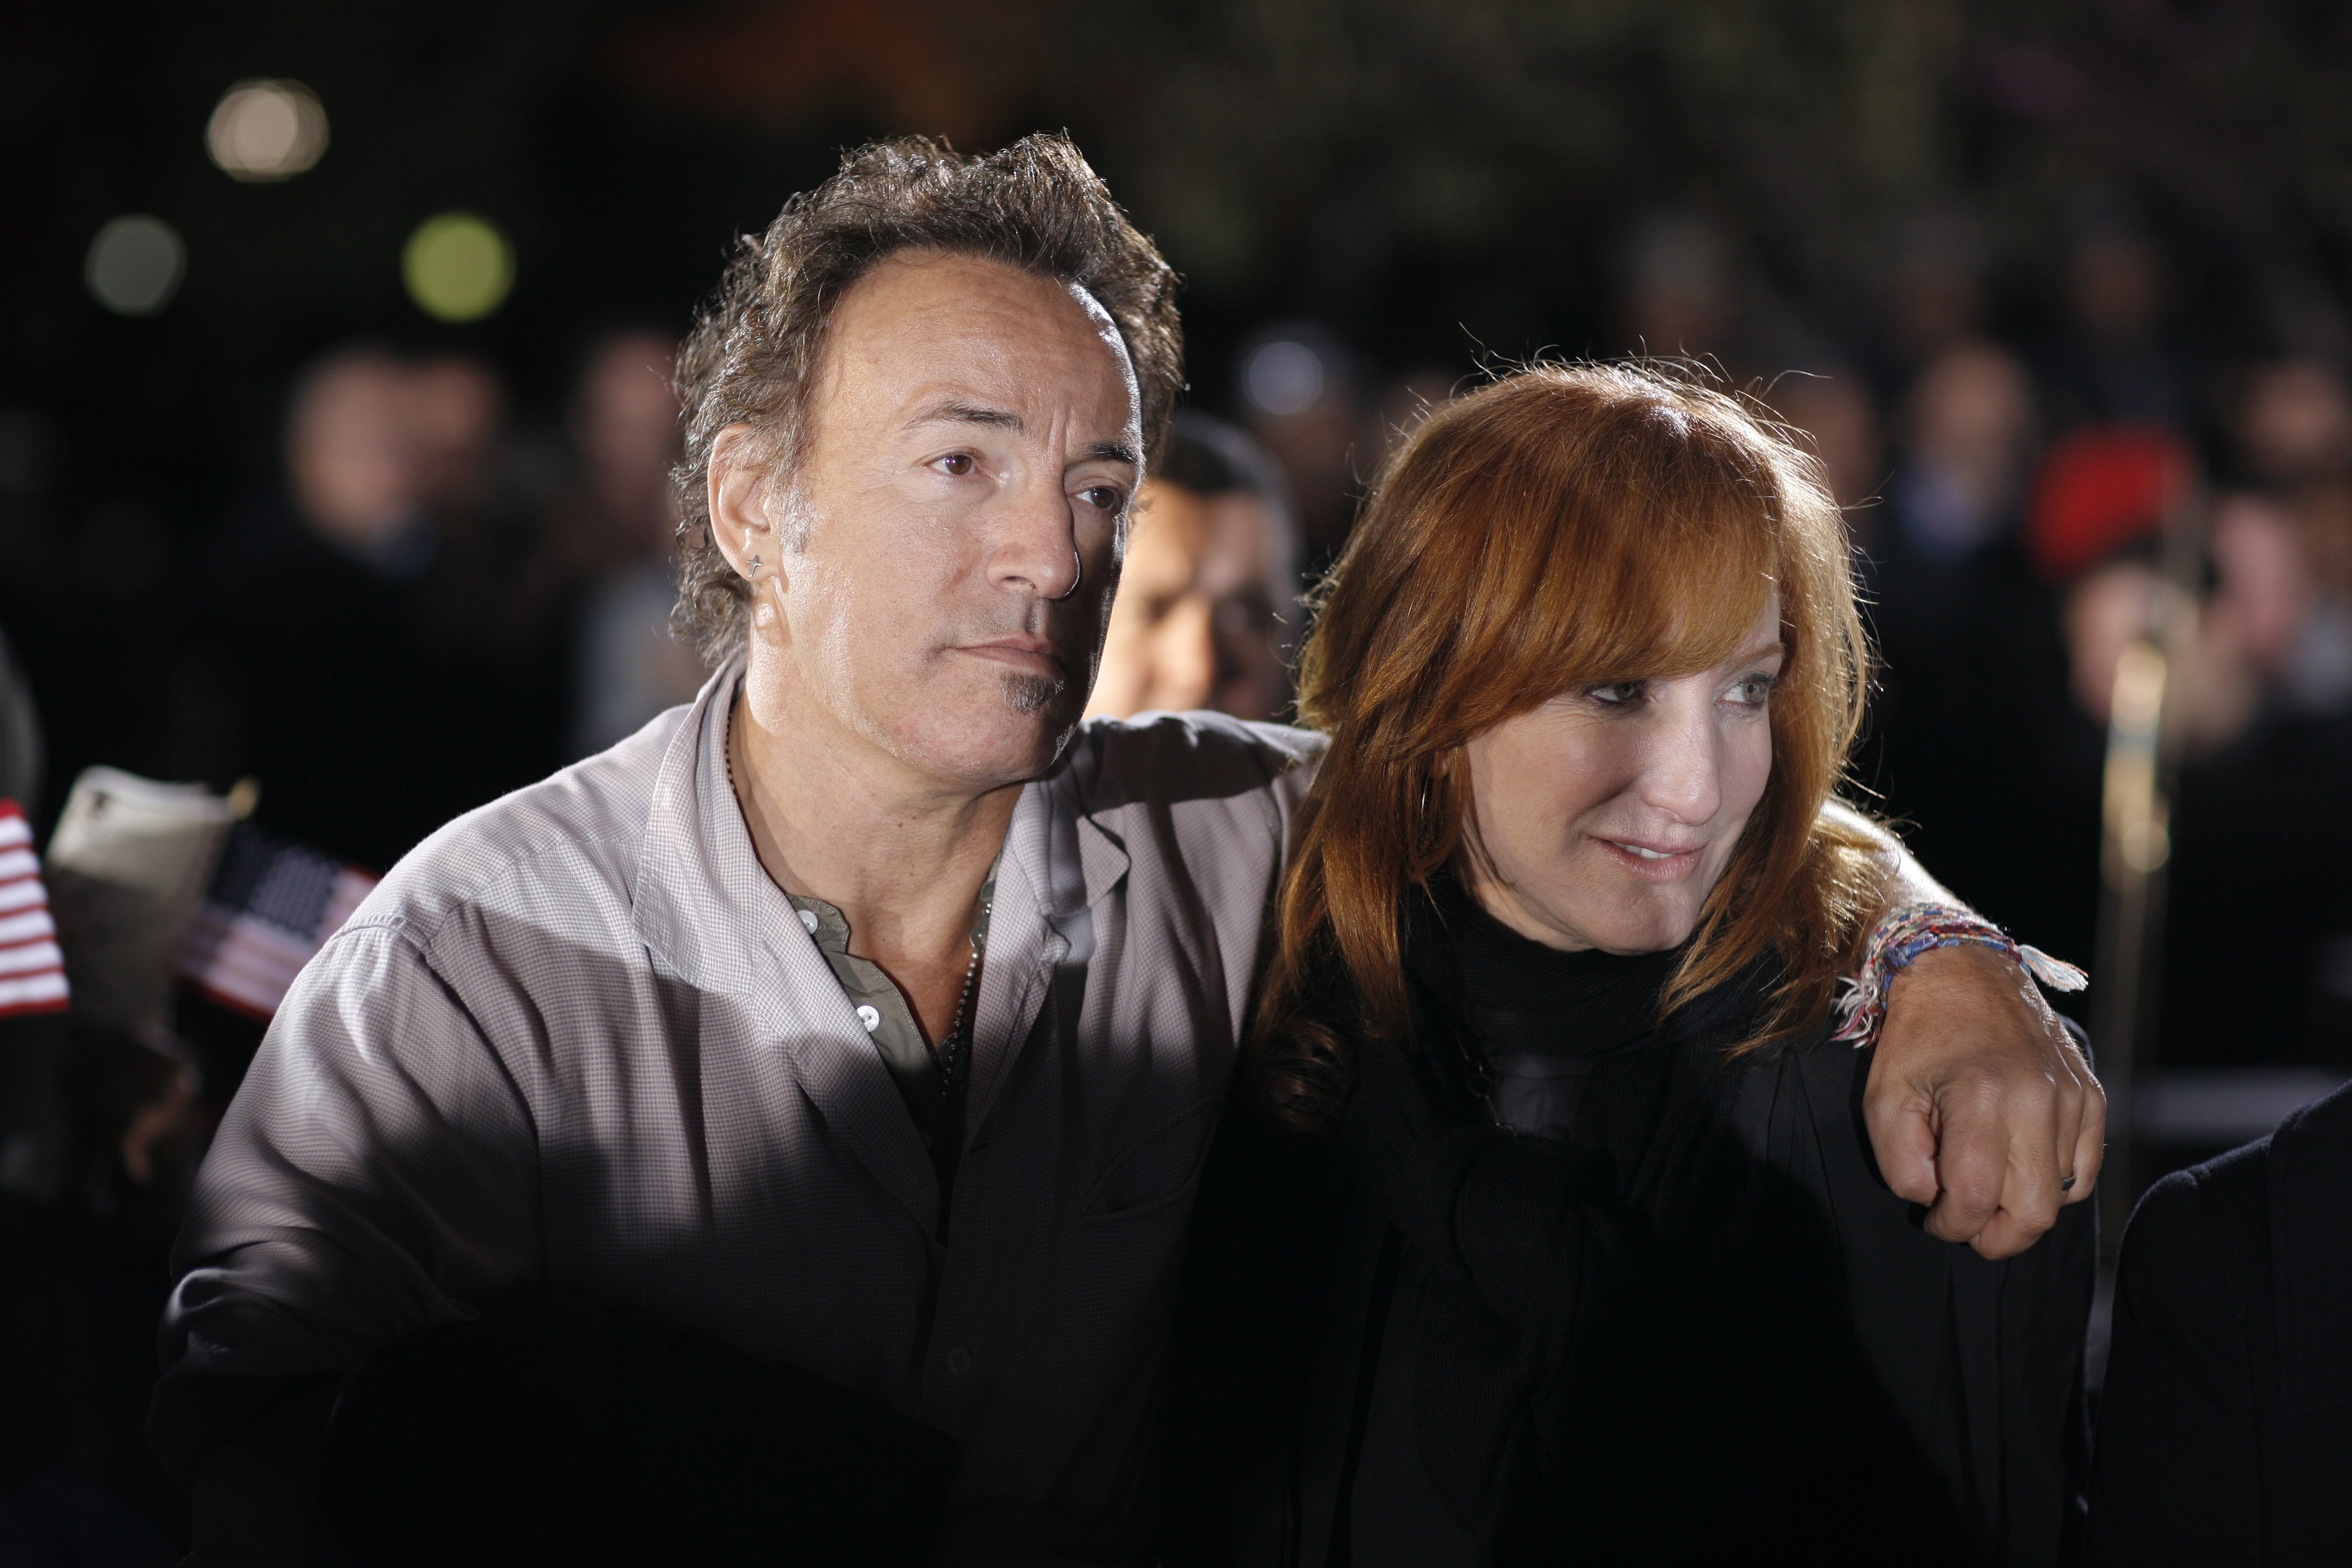 Bruce Springsteen and Patti Scialfa in Cleveland, Ohio, November 02, 2008 | Source: Getty Images